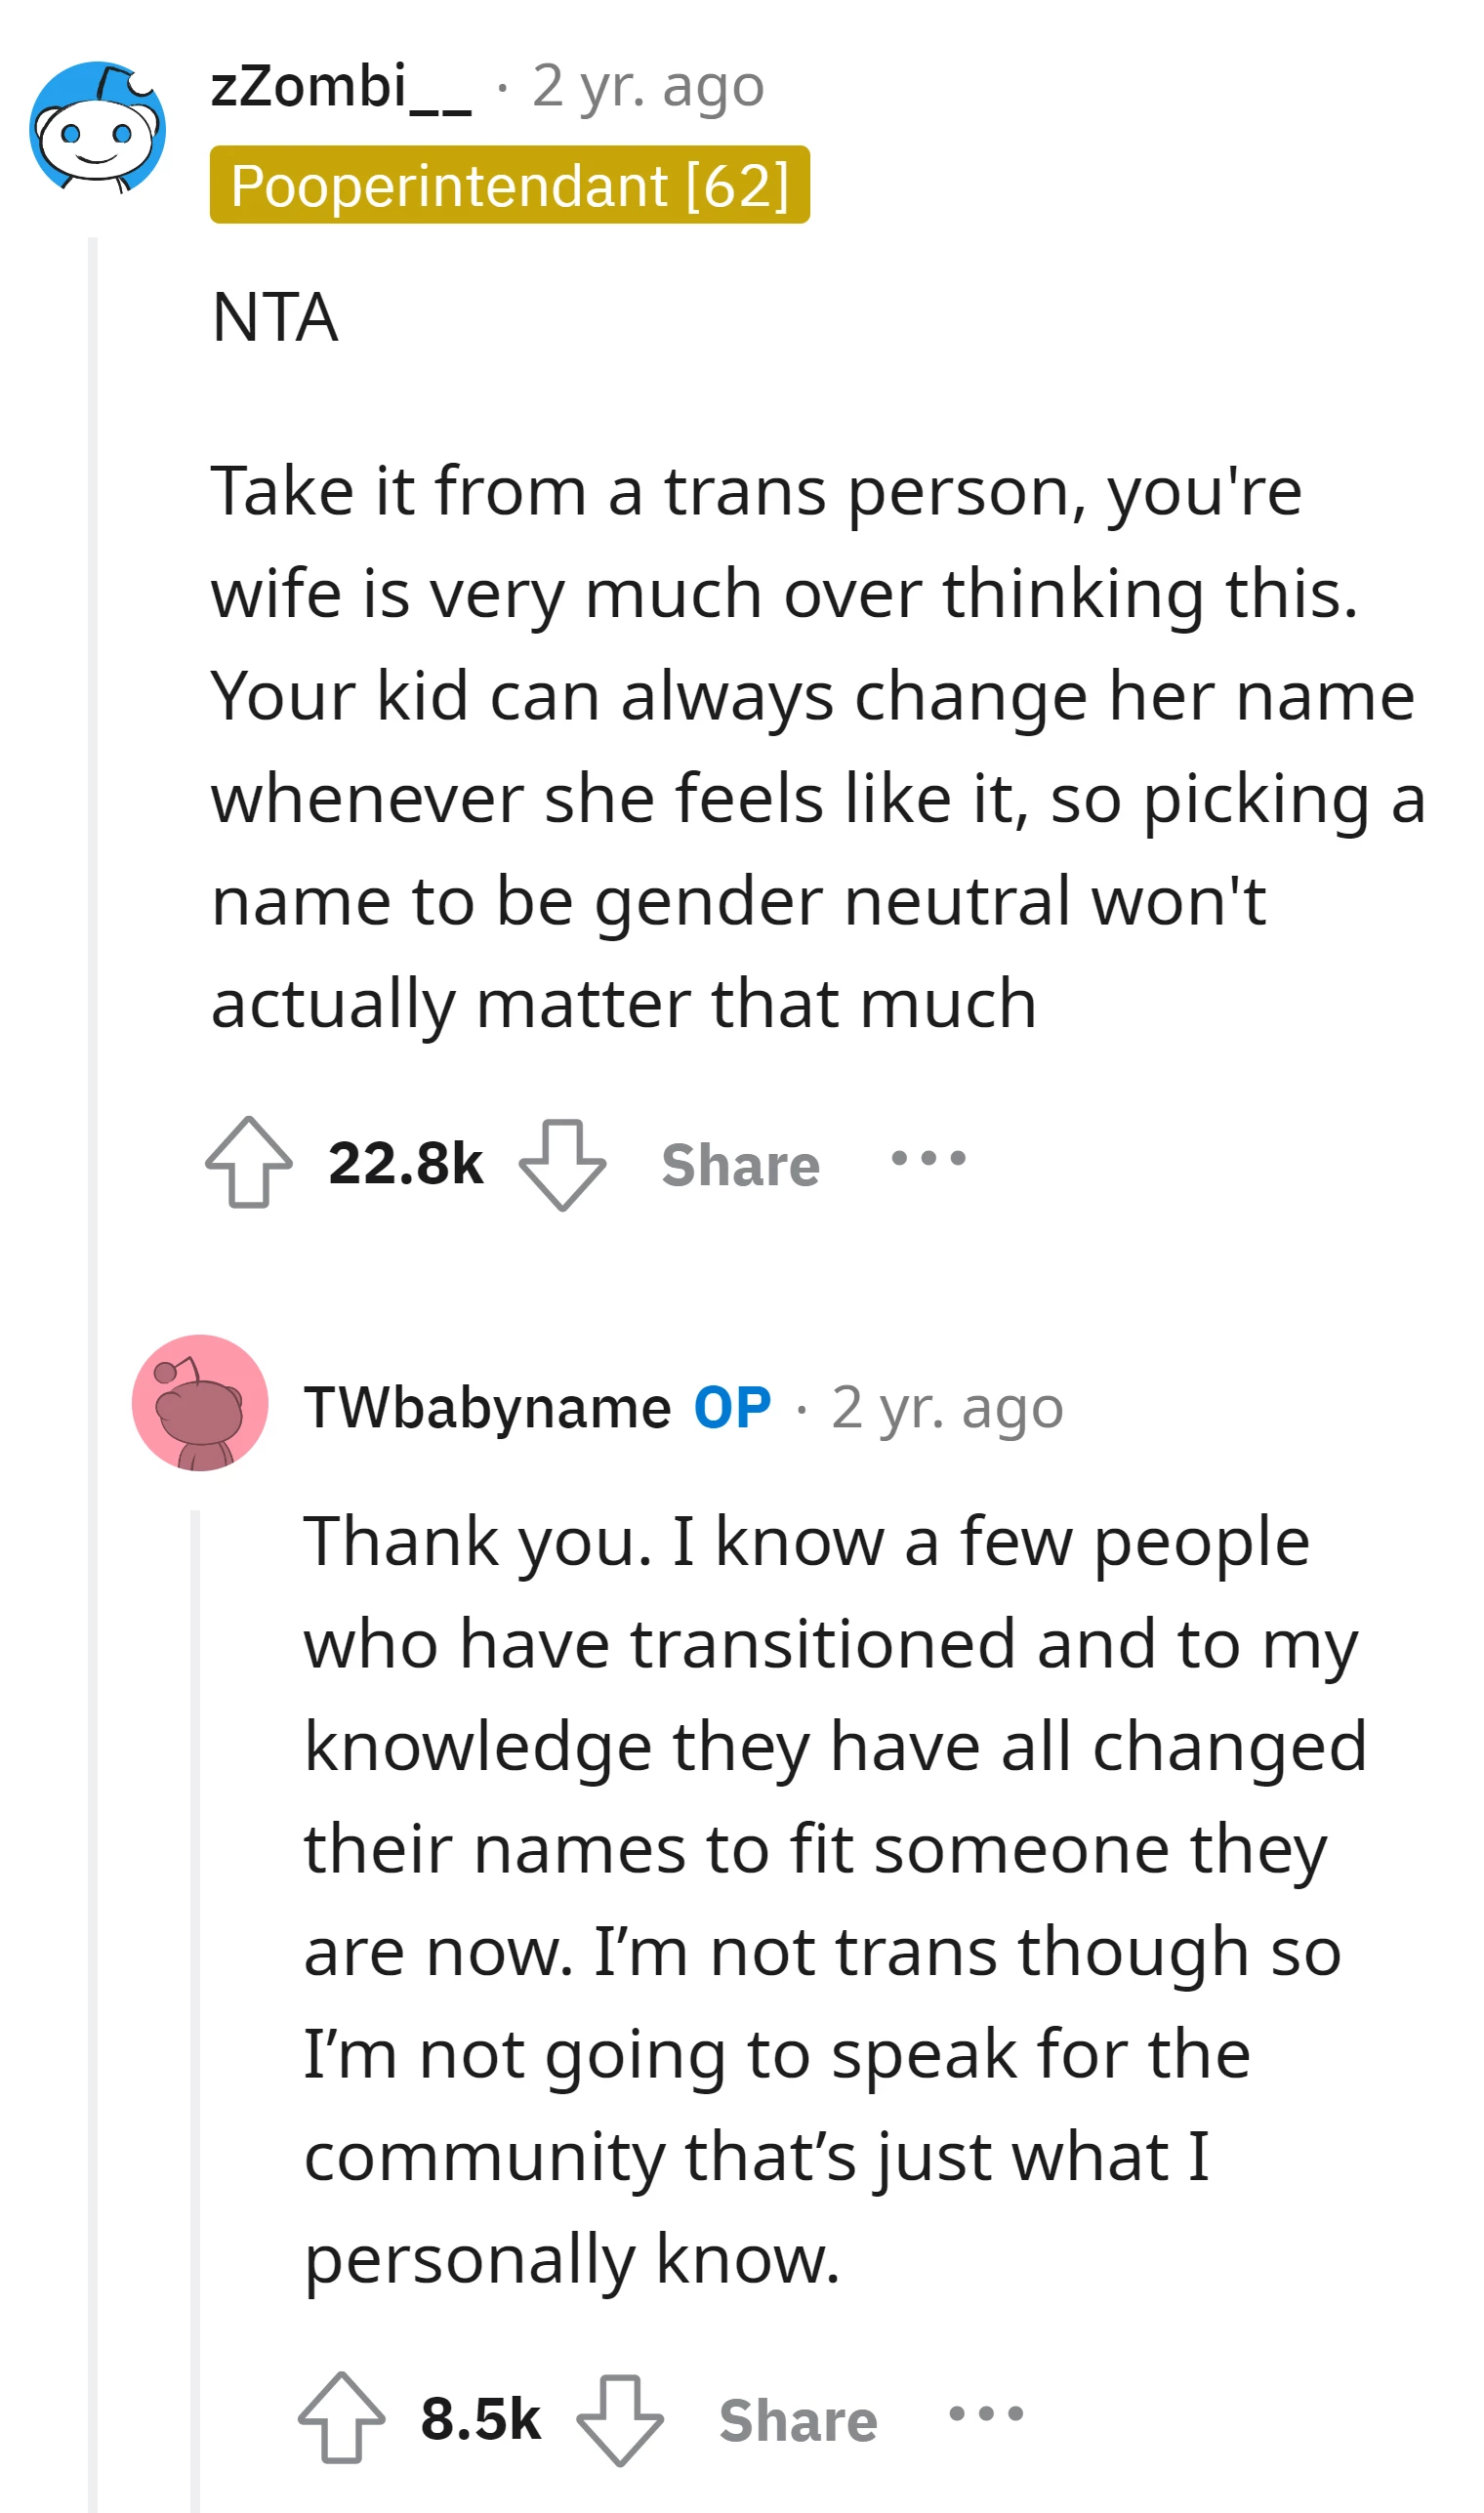 A trans person reassures the OP that choosing a gender-neutral name isn't as crucial